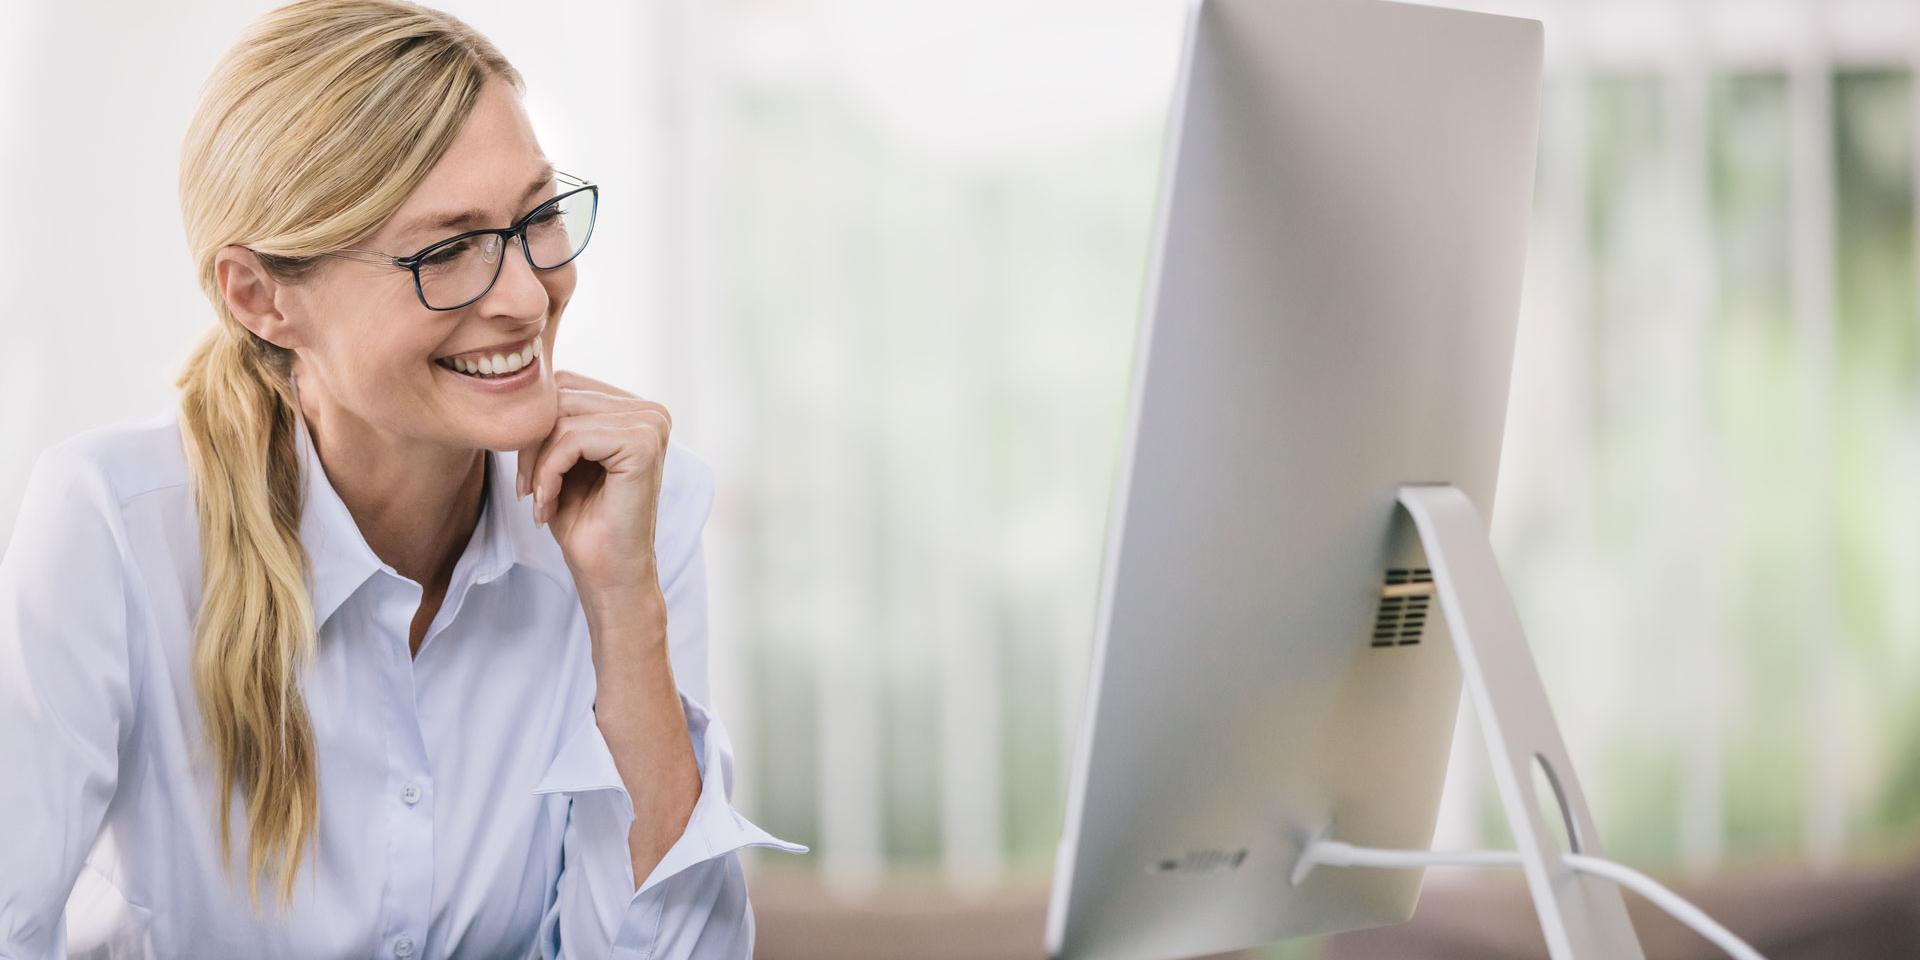 Computer glasses: just the thing for the workplace